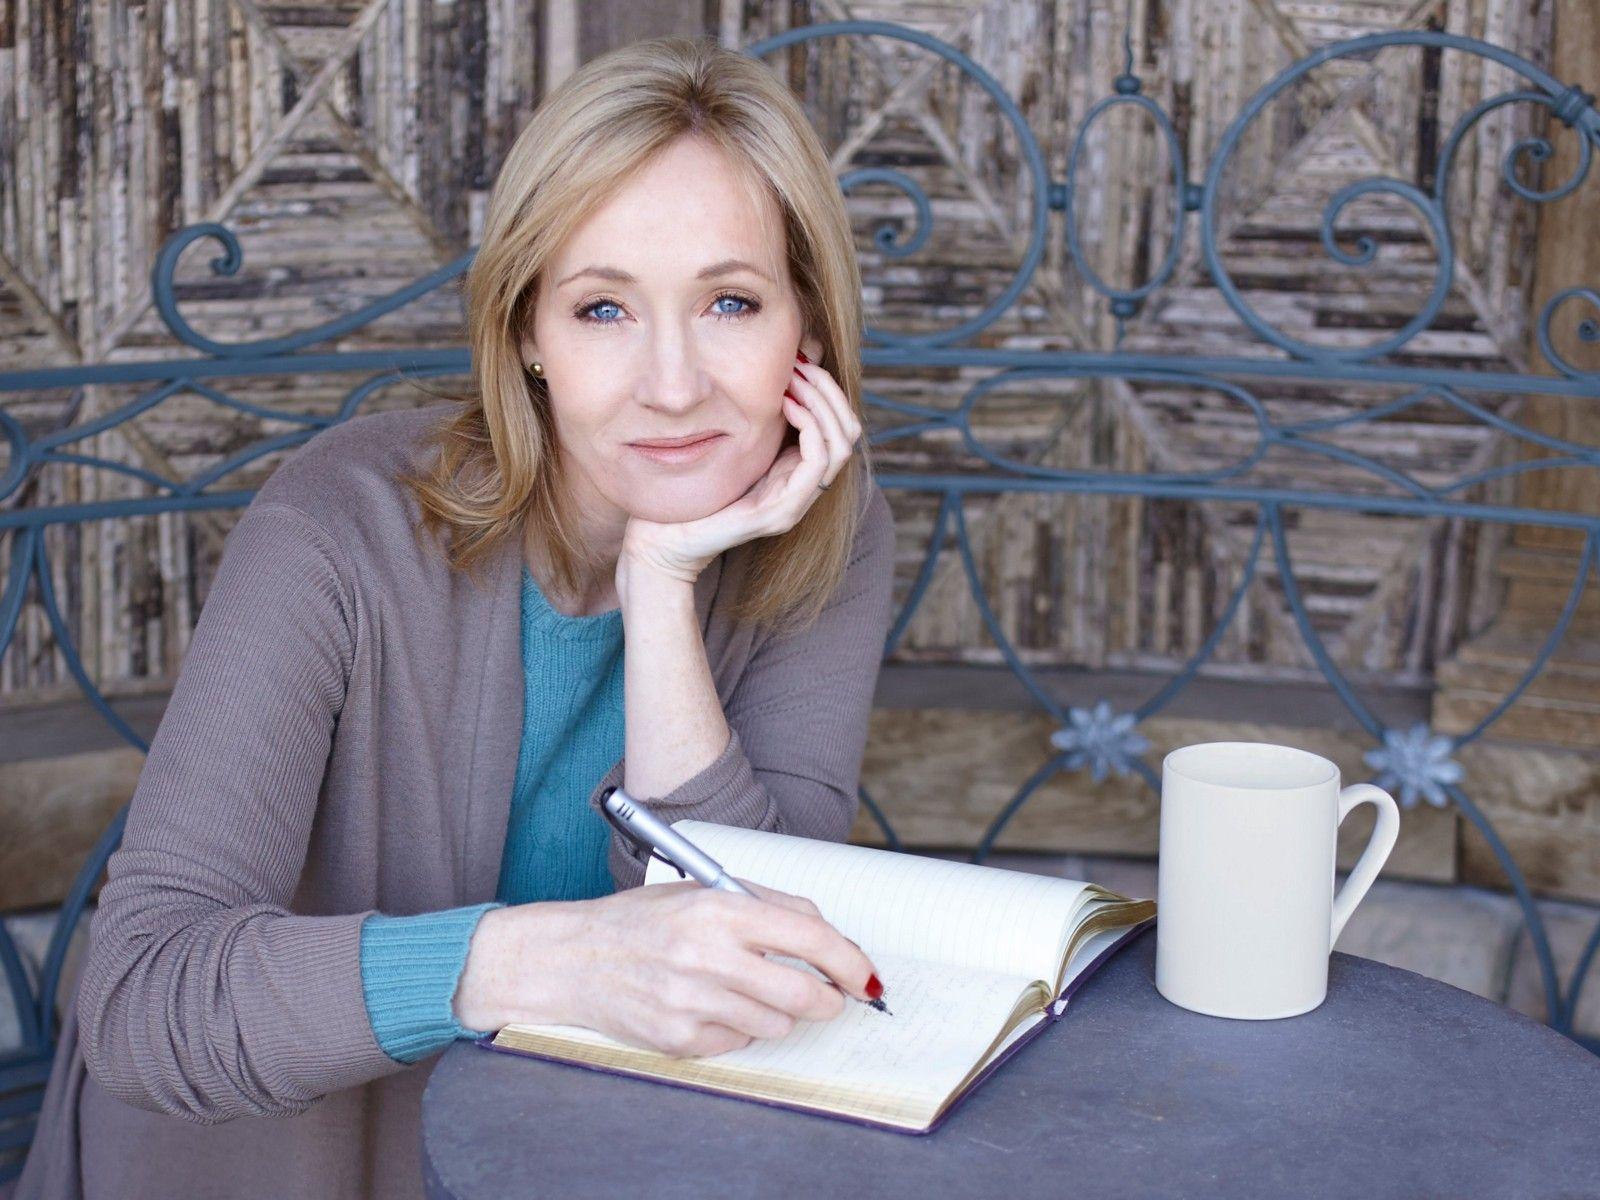 of the Best quotes from JK Rowling